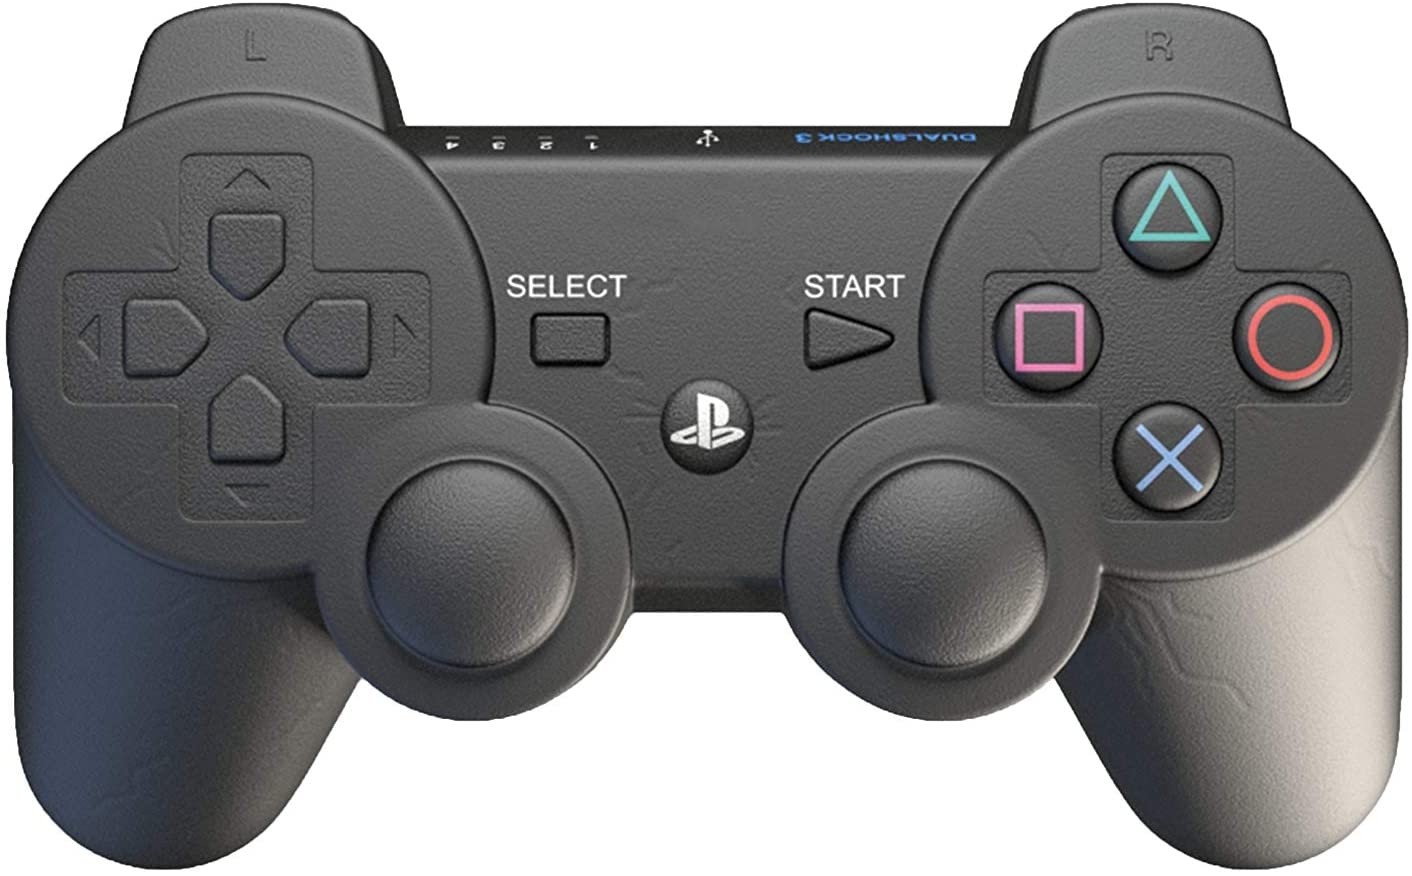 PlayStation Anti-Stress-Figur PS3 Controller